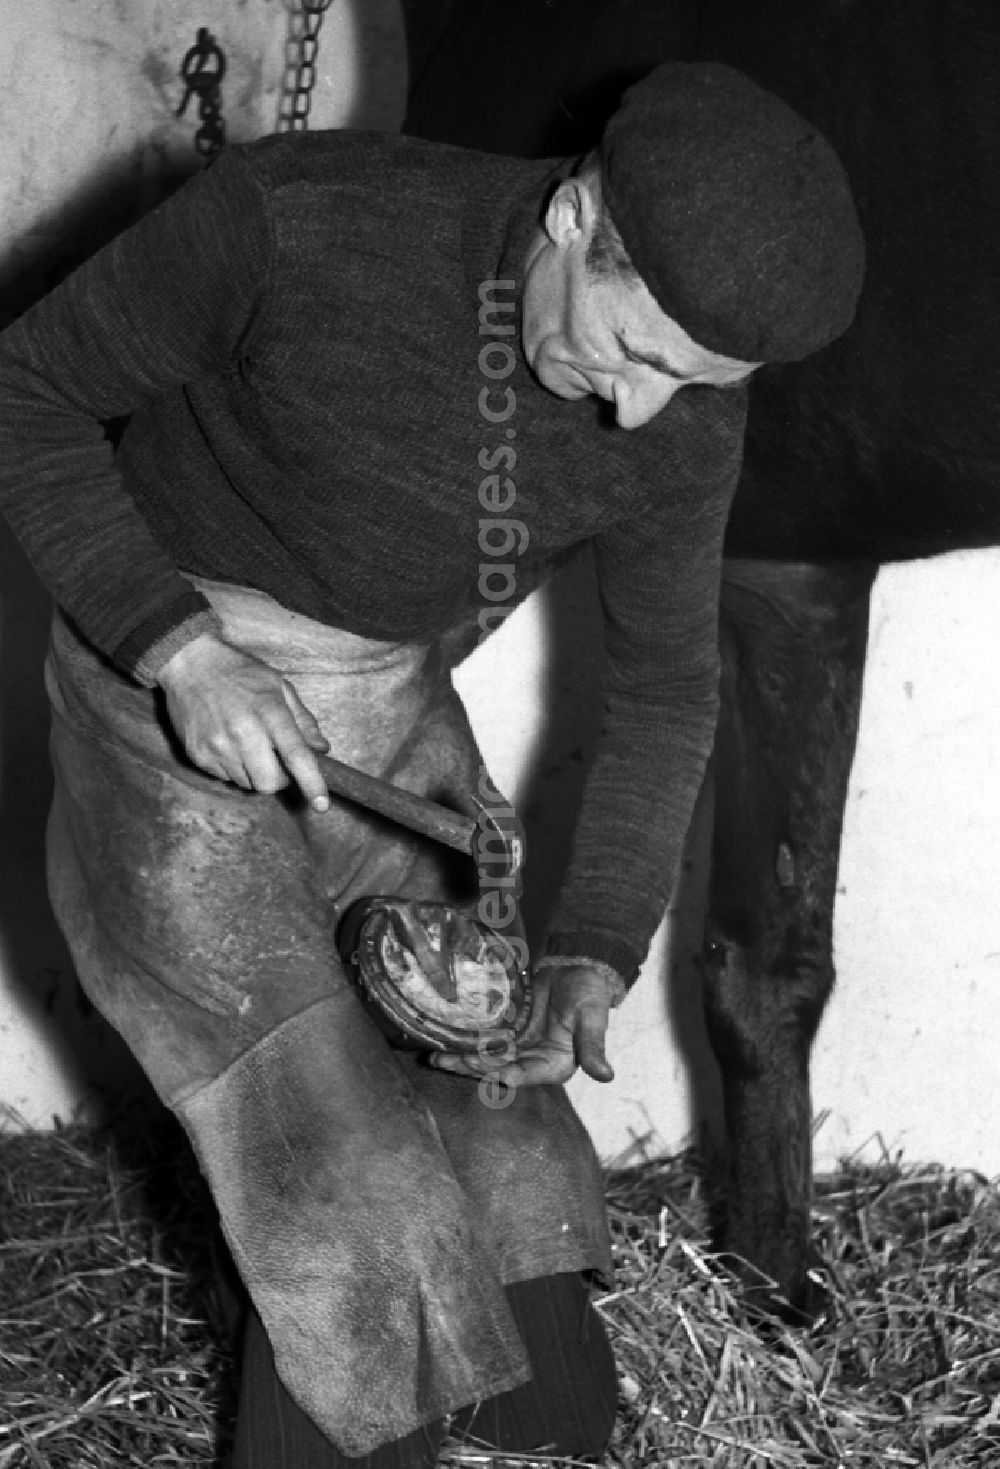 GDR photo archive: Dresden - Farrier - Farrier shoeing horses' hooves in Dresden in the state Saxony on the territory of the former GDR, German Democratic Republic